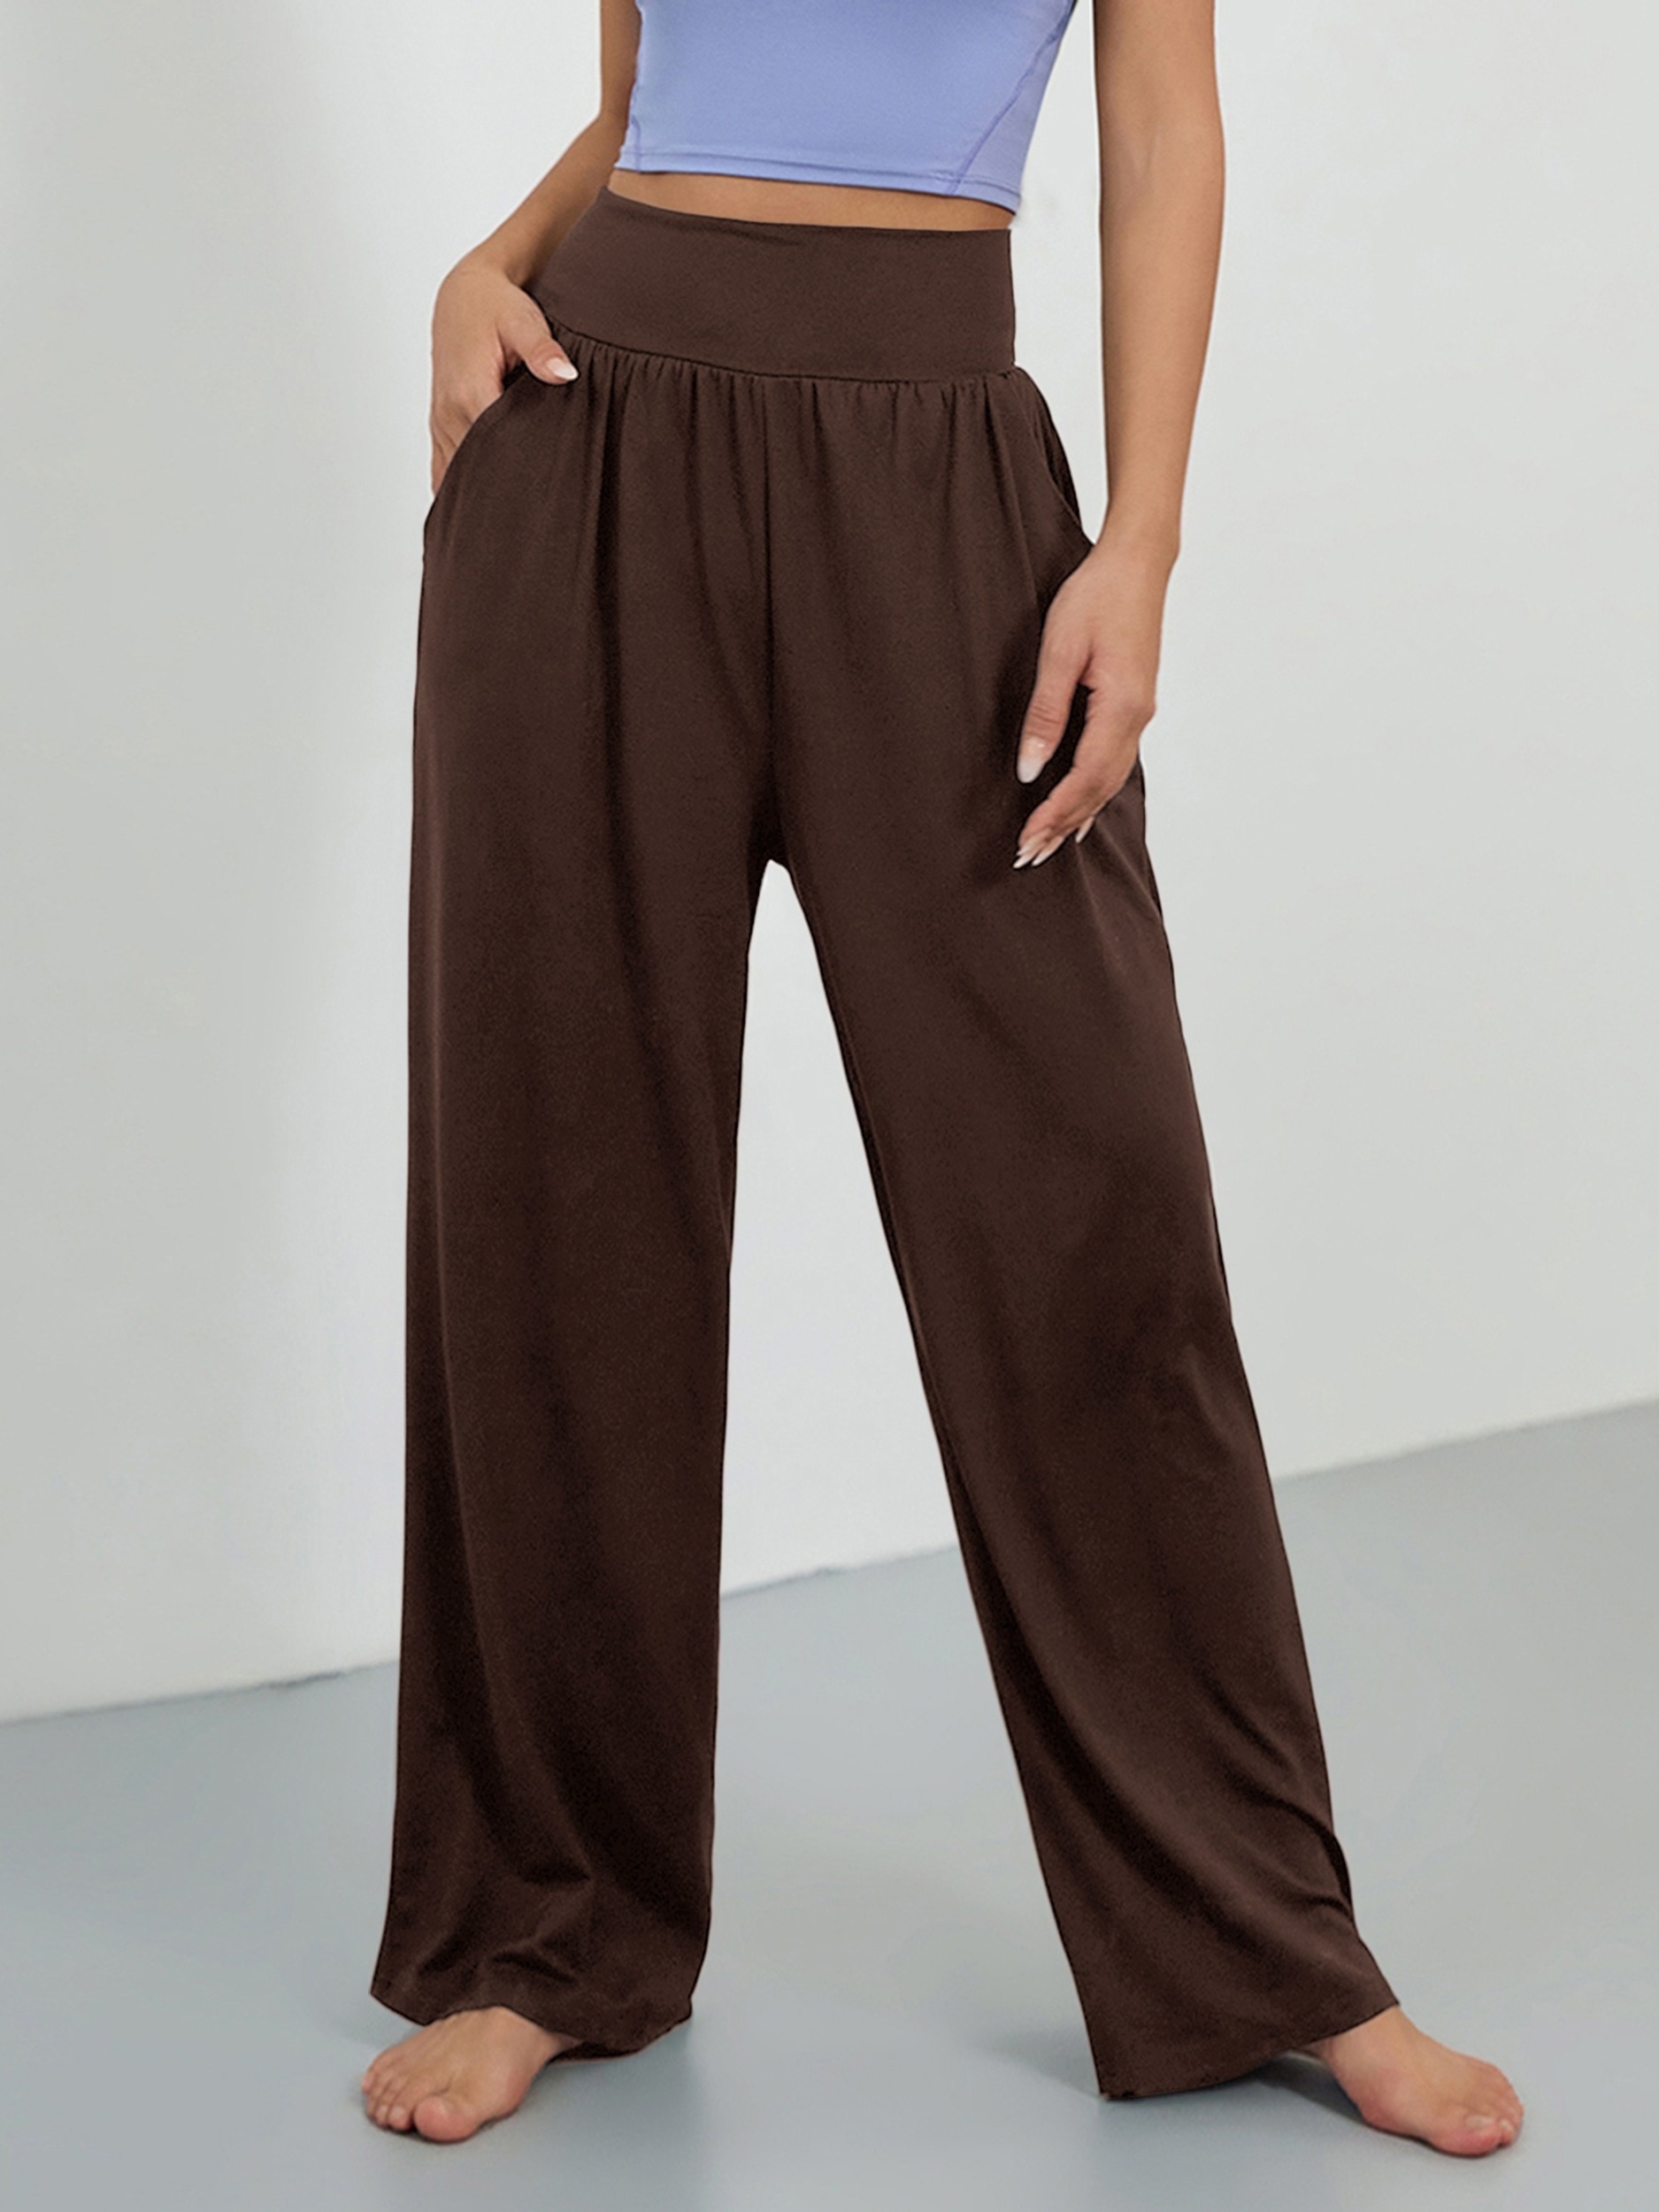 Chocolate Brown Thigh Pocket Casual Sweatpants